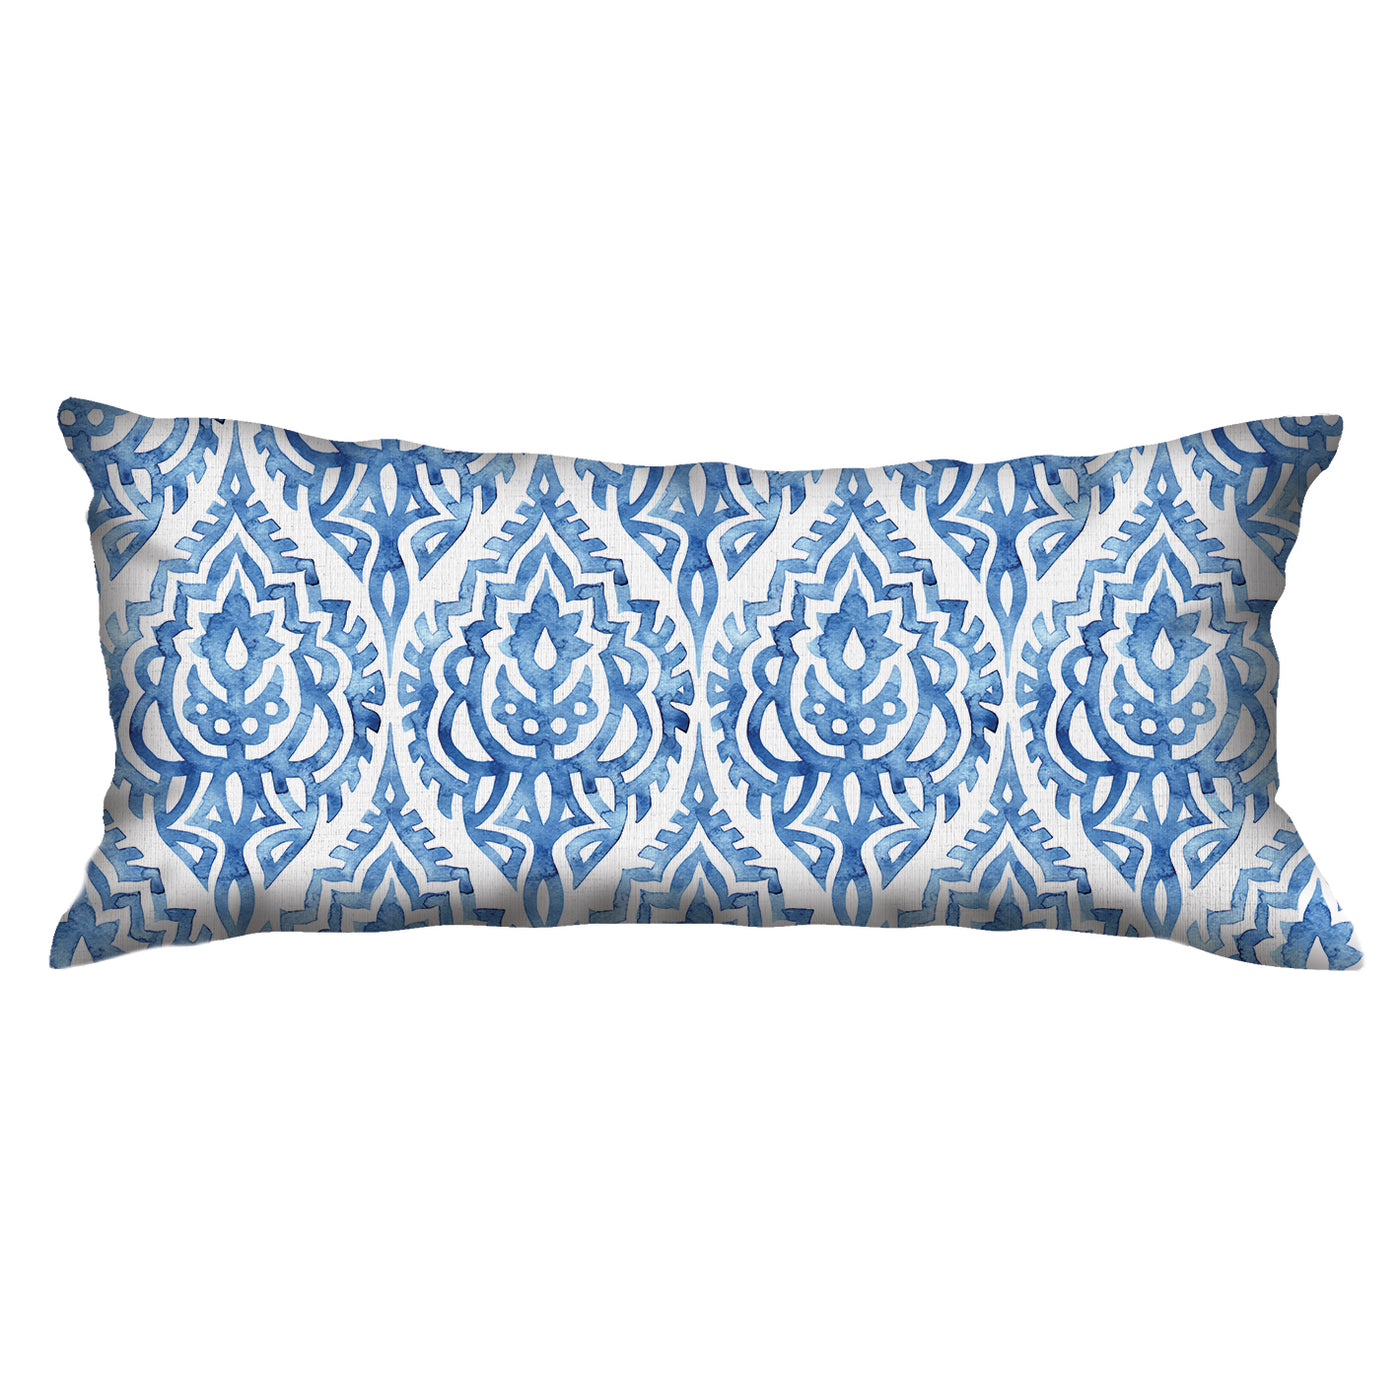 Scatter Cushion  - Abstract blue and white watercolour pattern